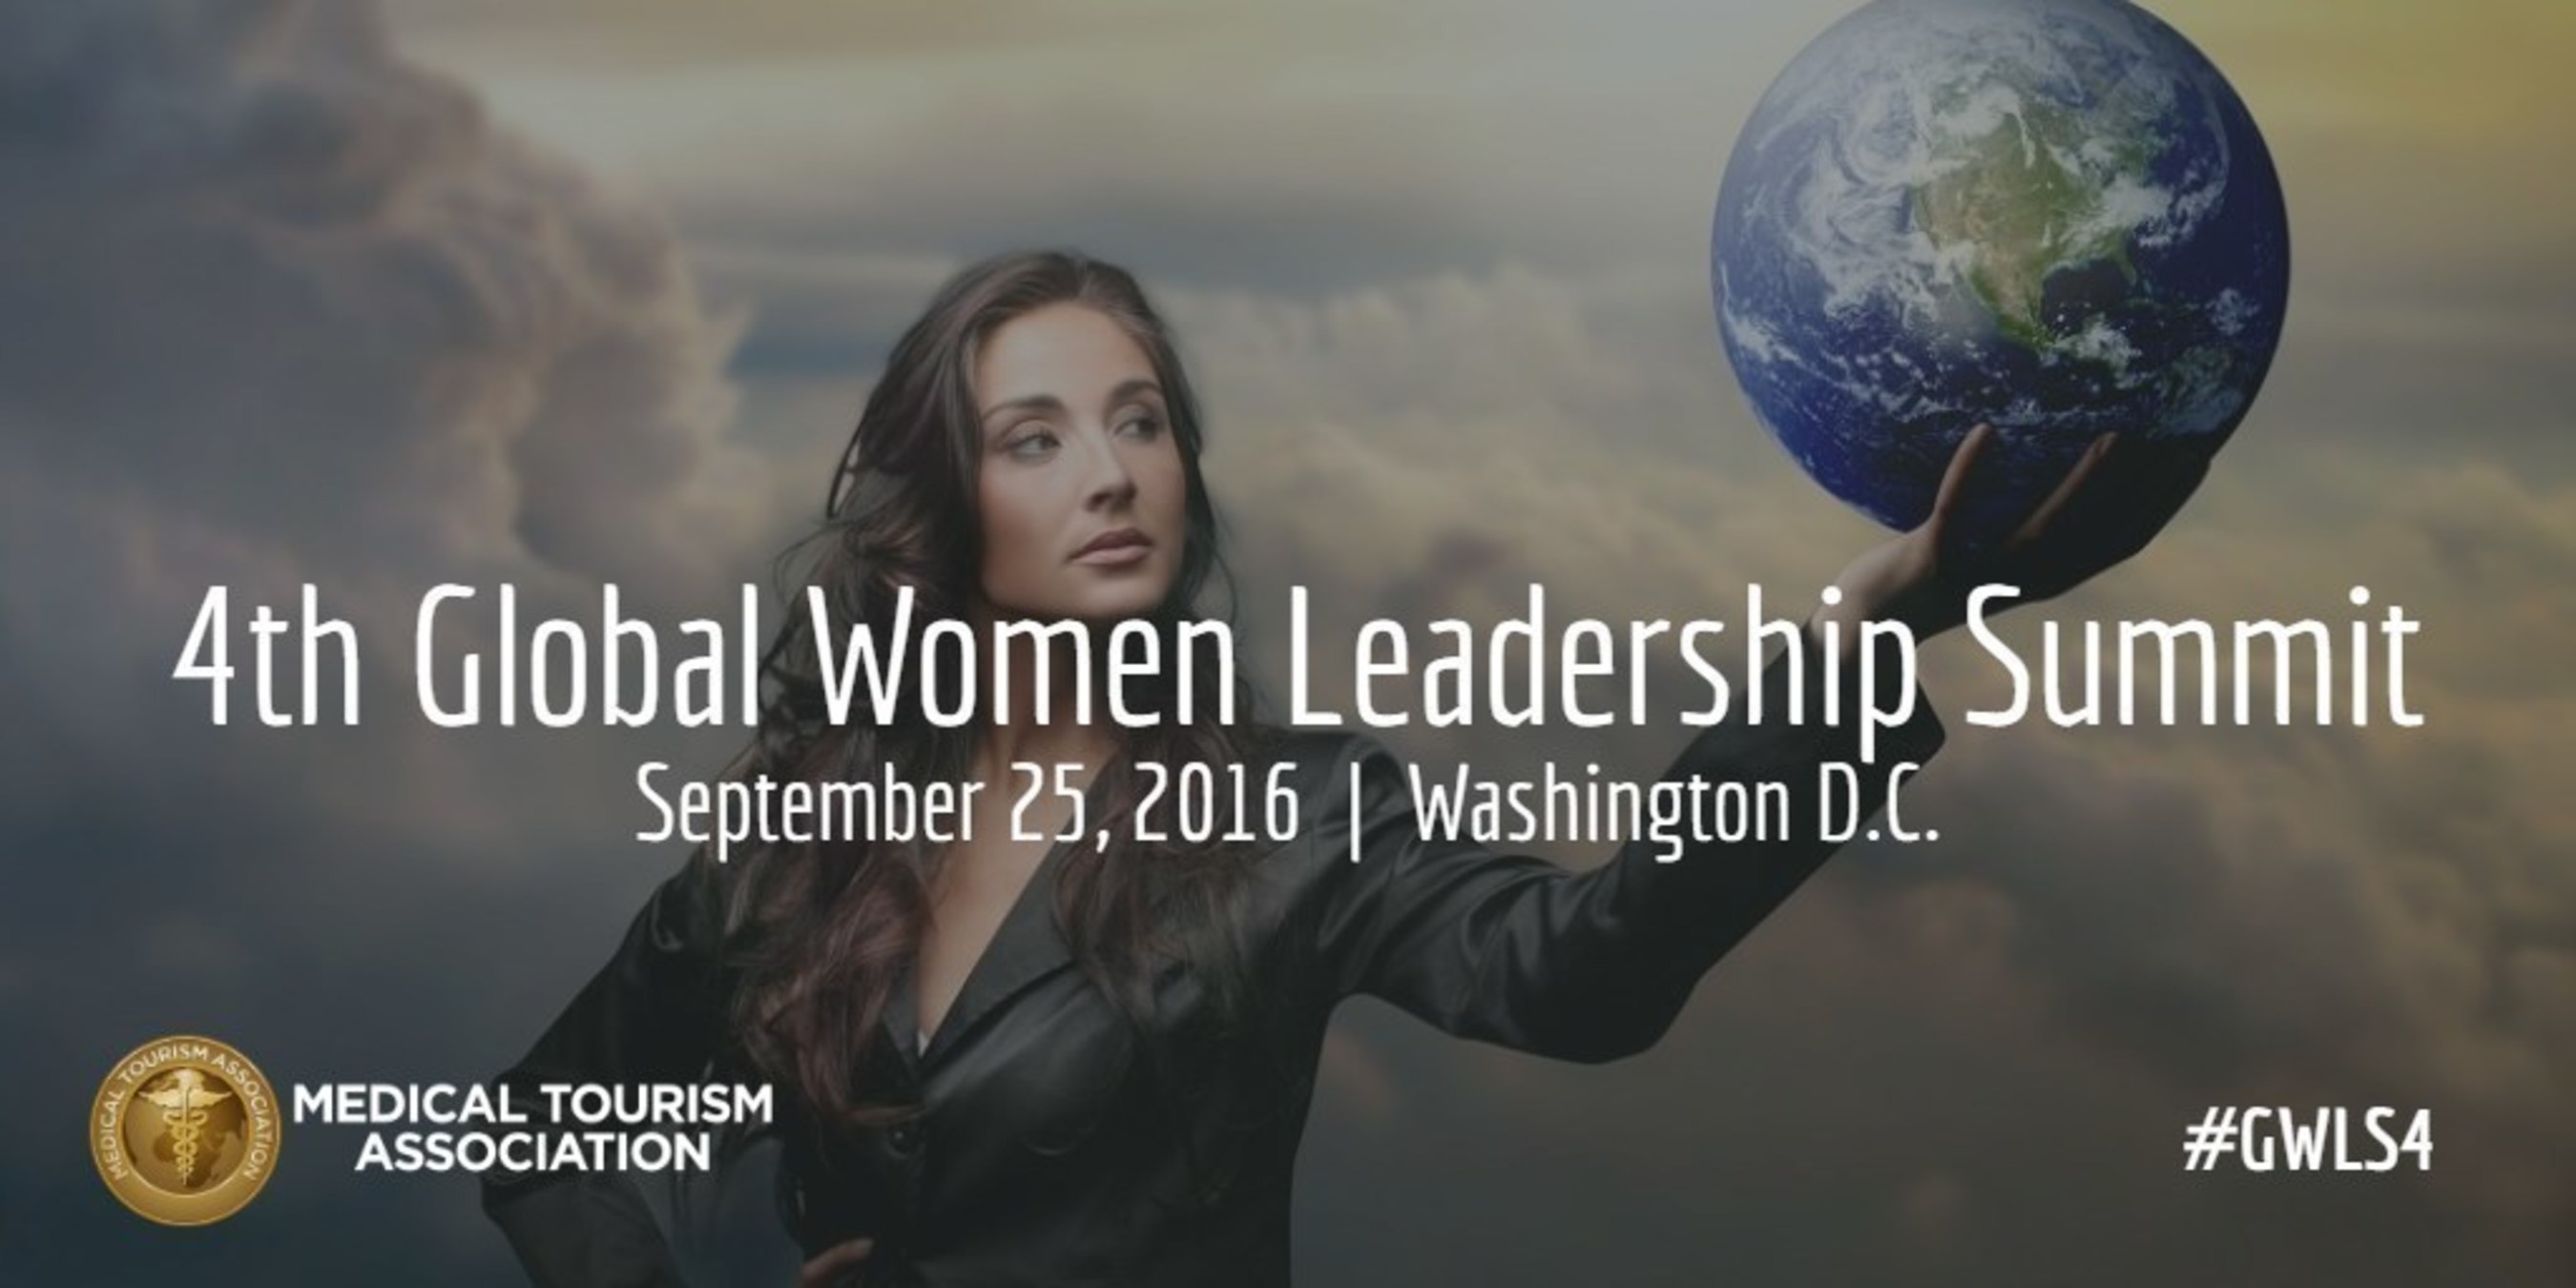 The 4th Global Women's Leadership Summit is set to take place in Washington, D. C. this September 25, 2016.